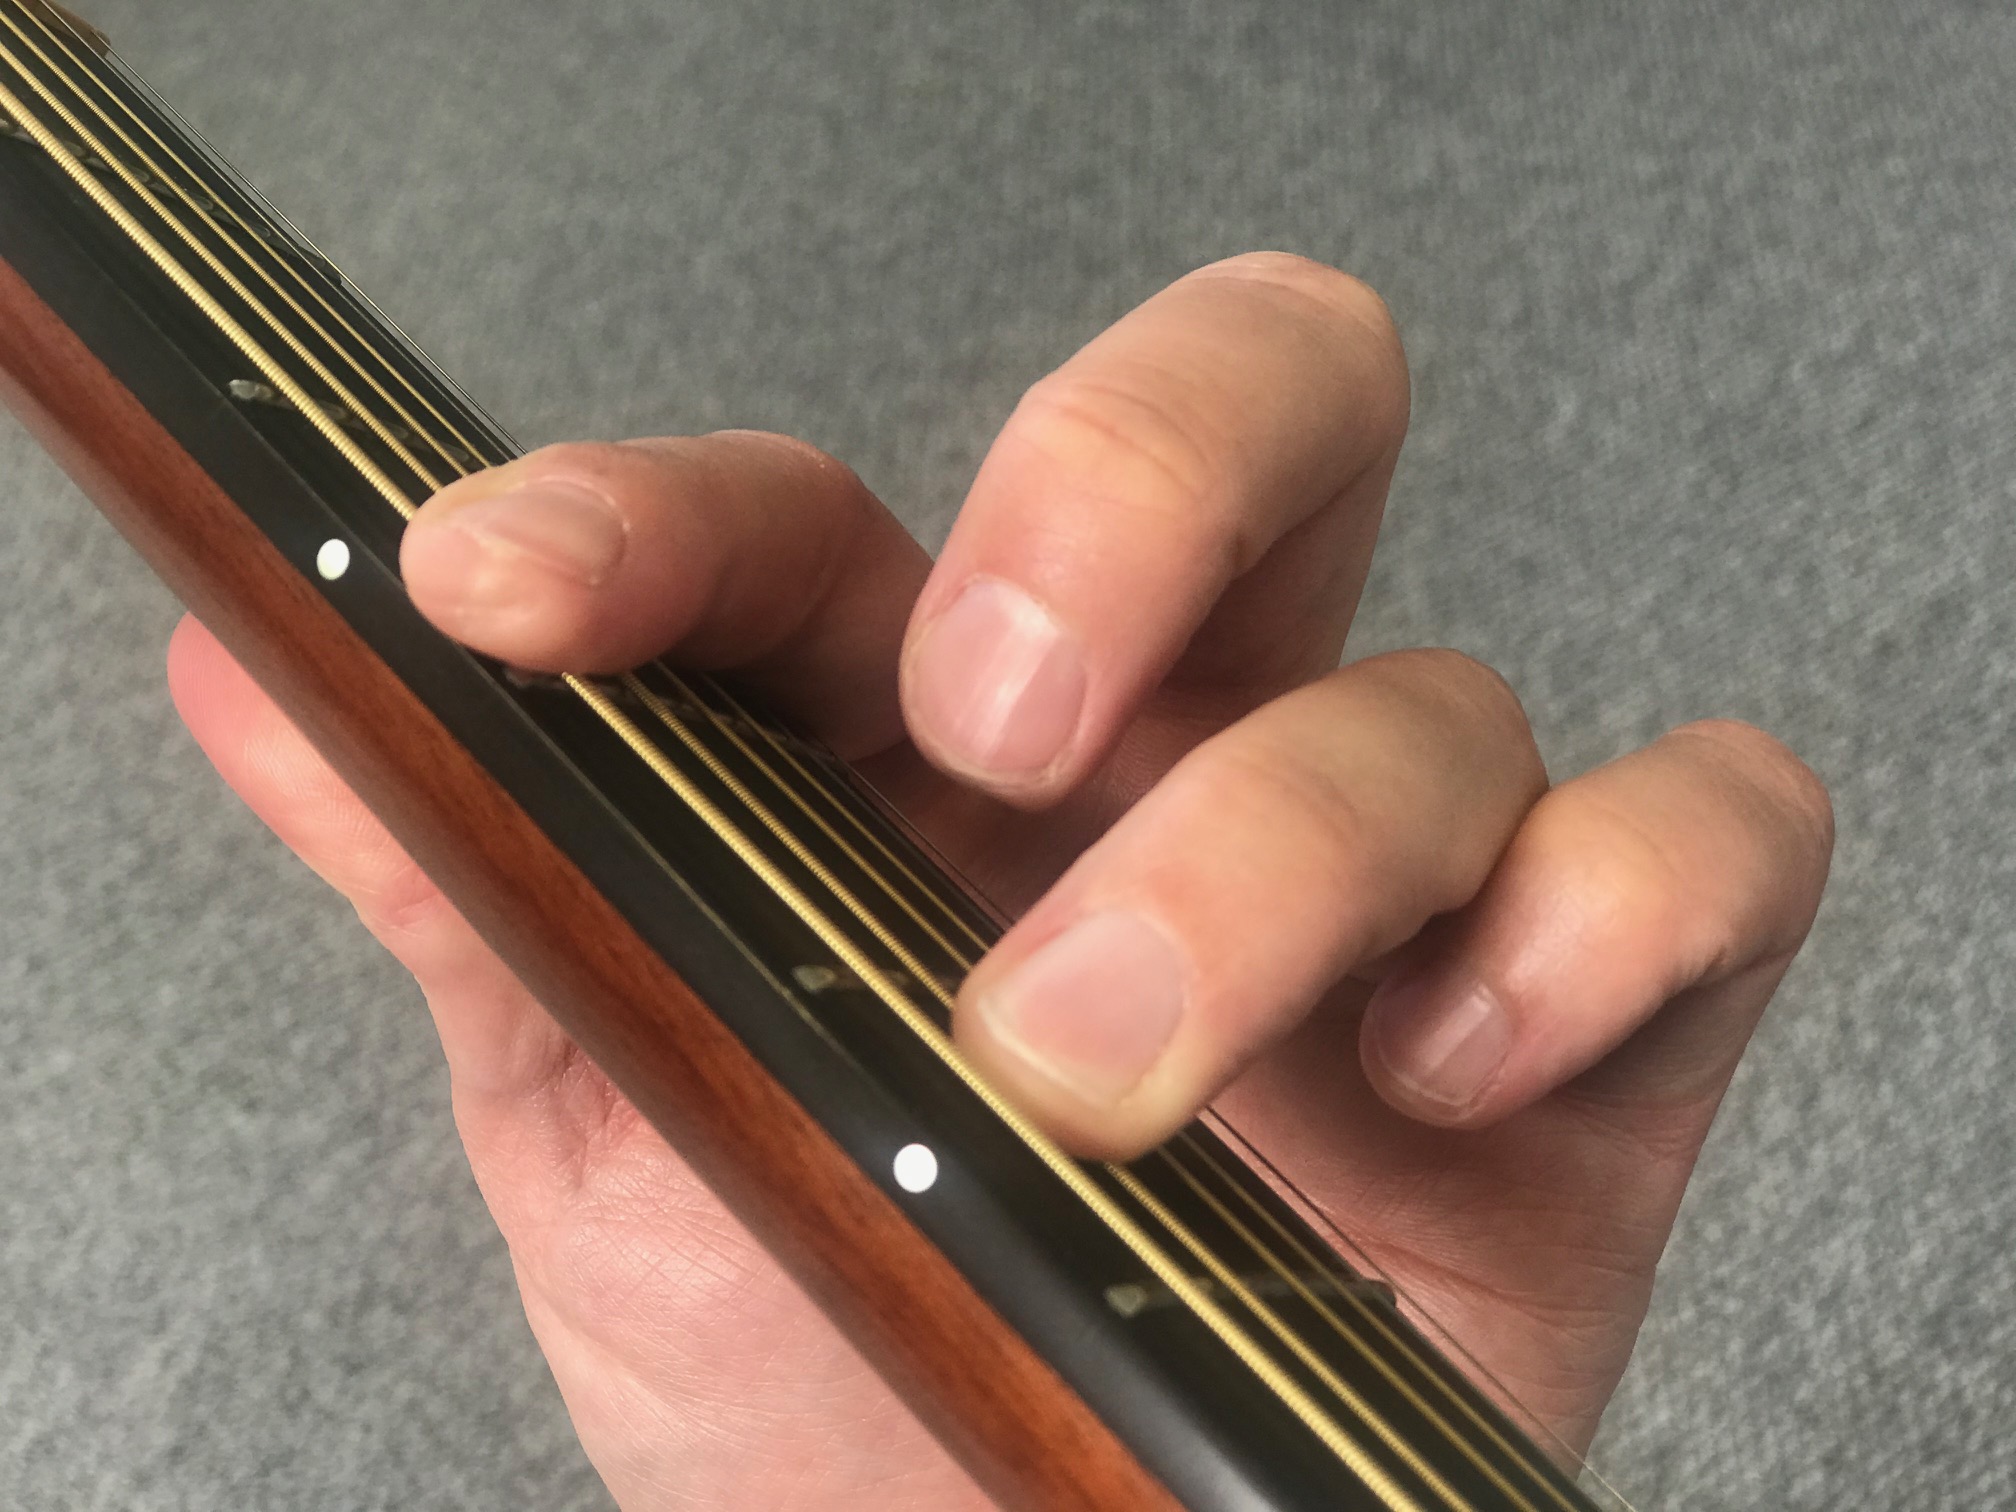 How To Play The Gm7 Chord On Acoustic Guitar